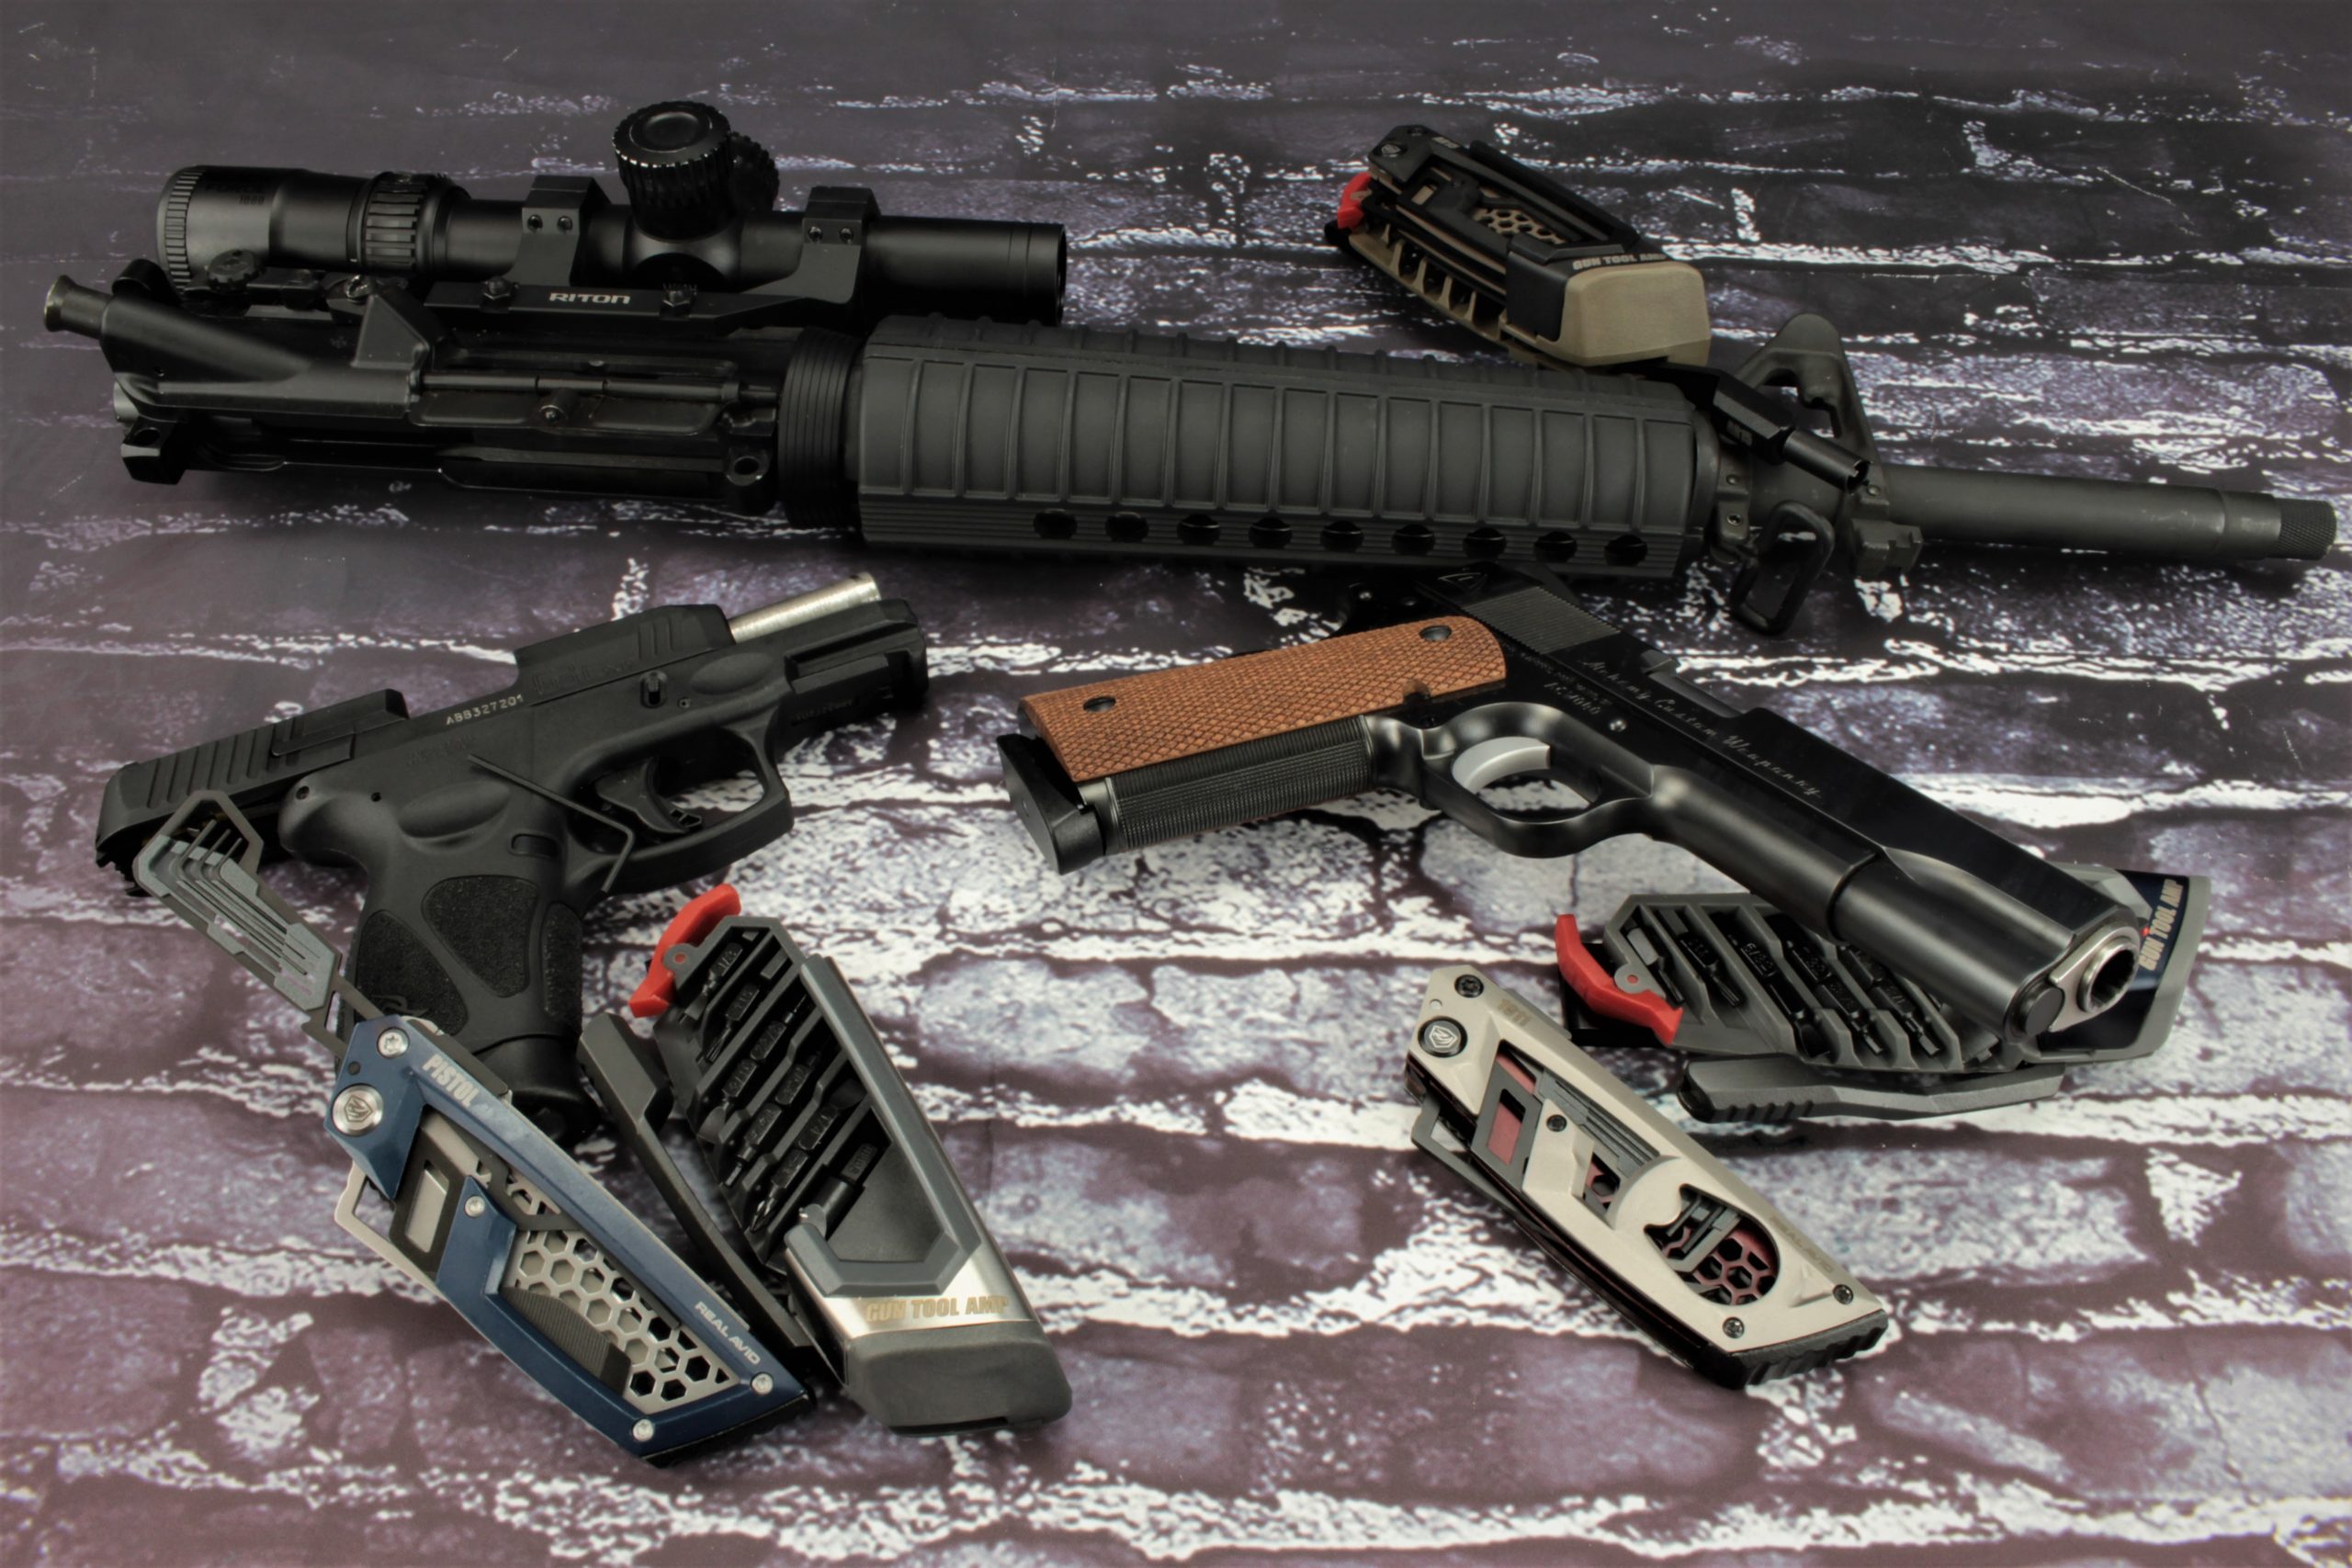 Real Avid AMP Firearm Specific Multi Tools - Popular Everyday Carry